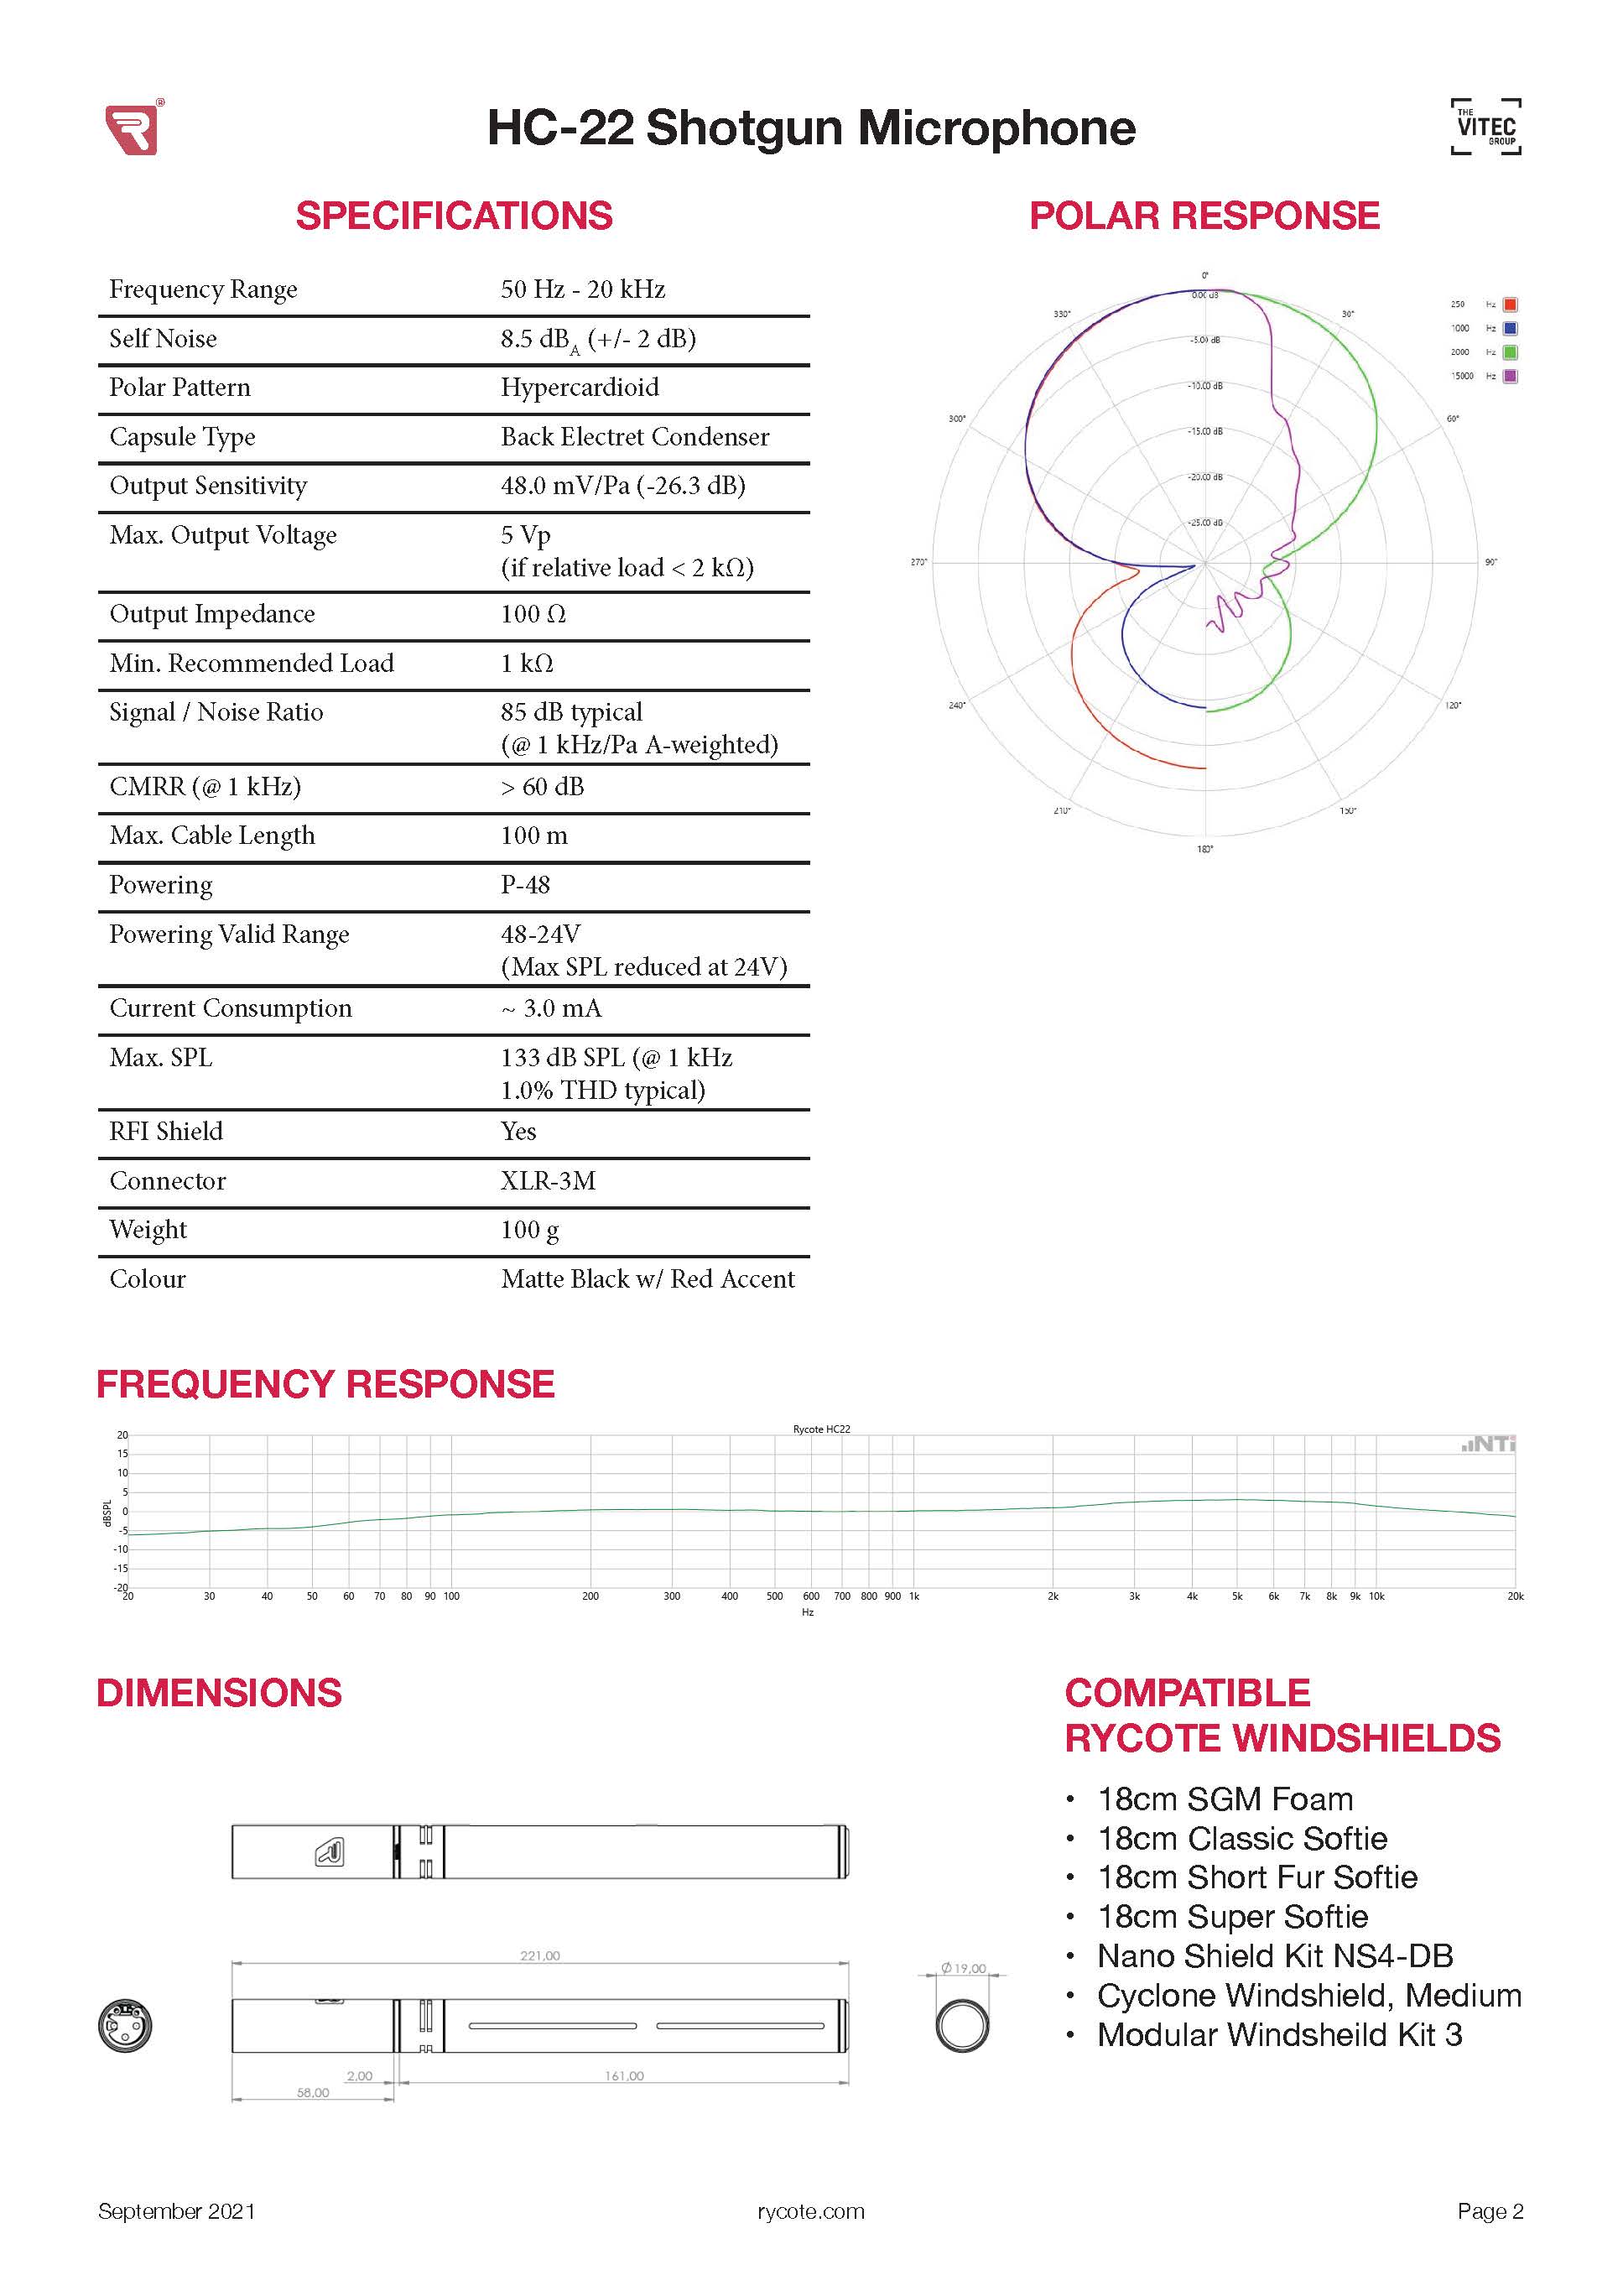 HC-22 Specifications